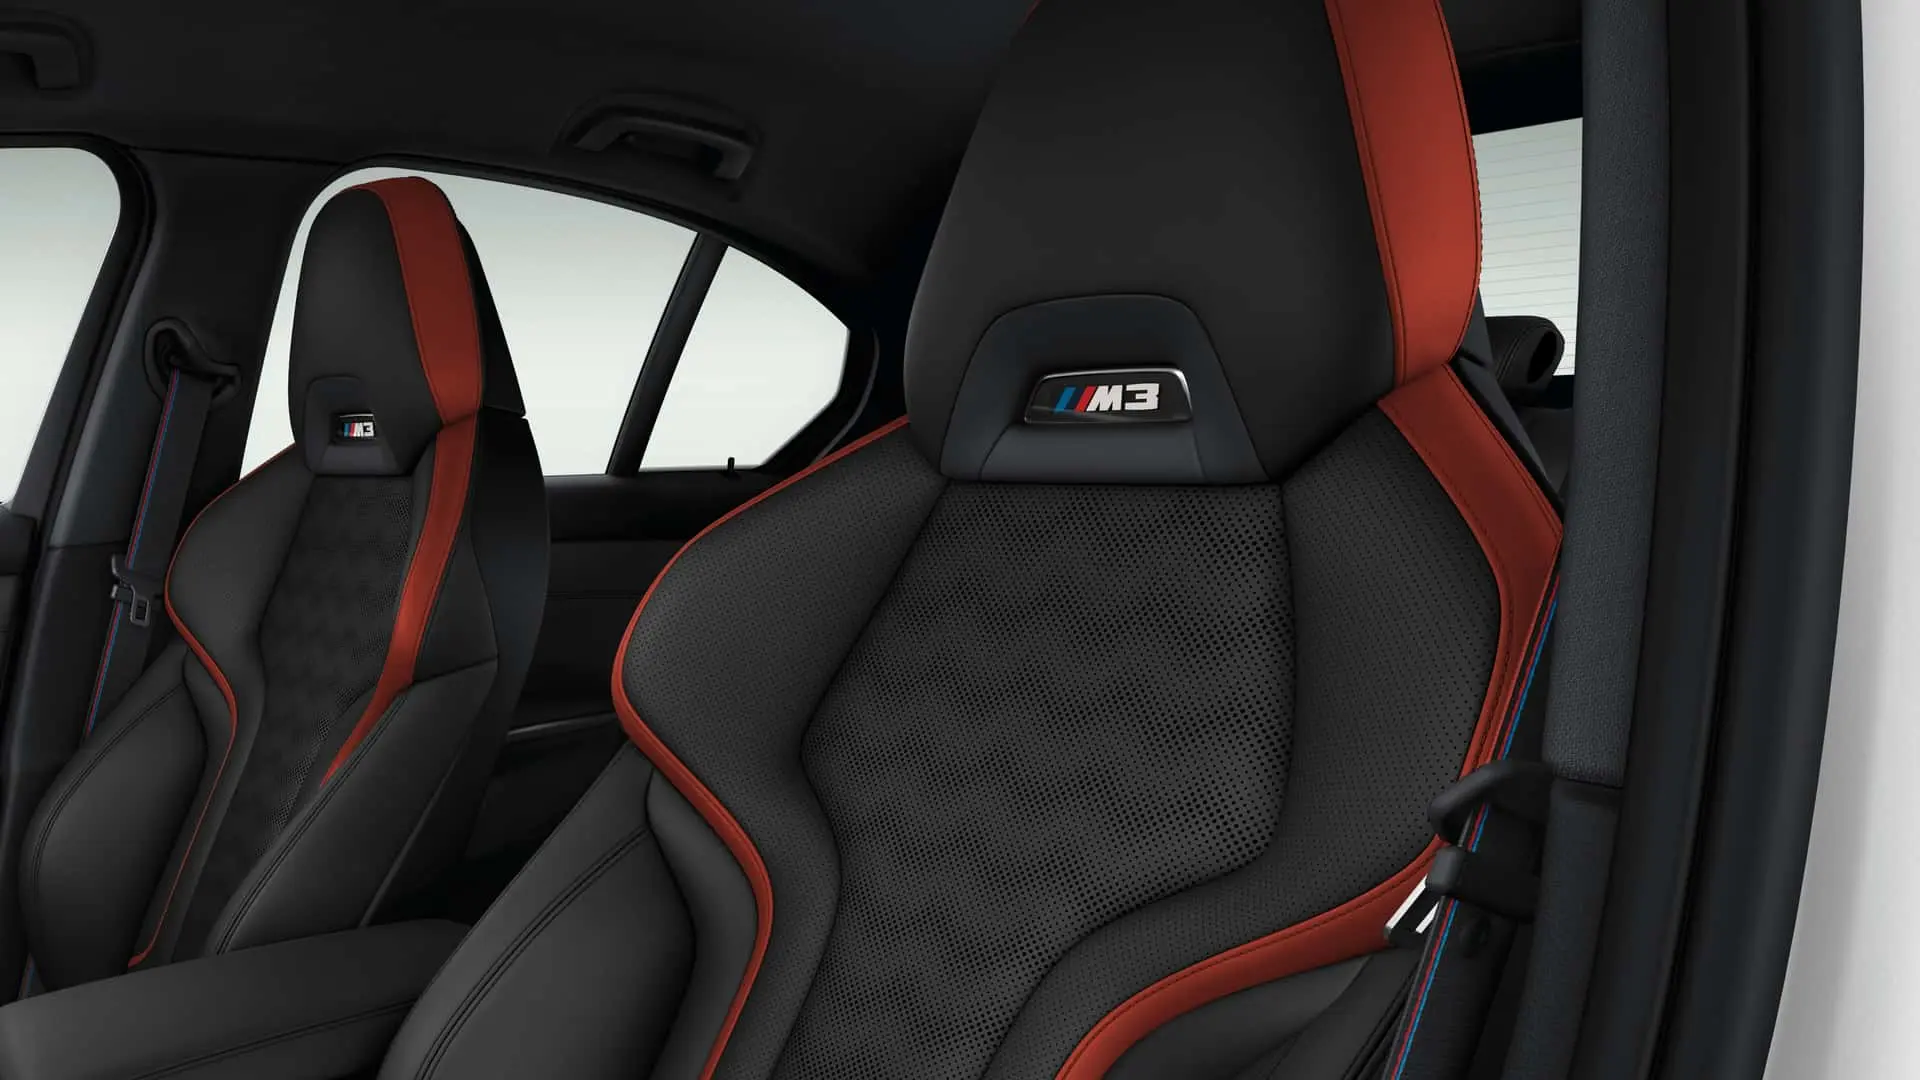 Limited edition of 150 units of BMW M3 Manual Final Edition